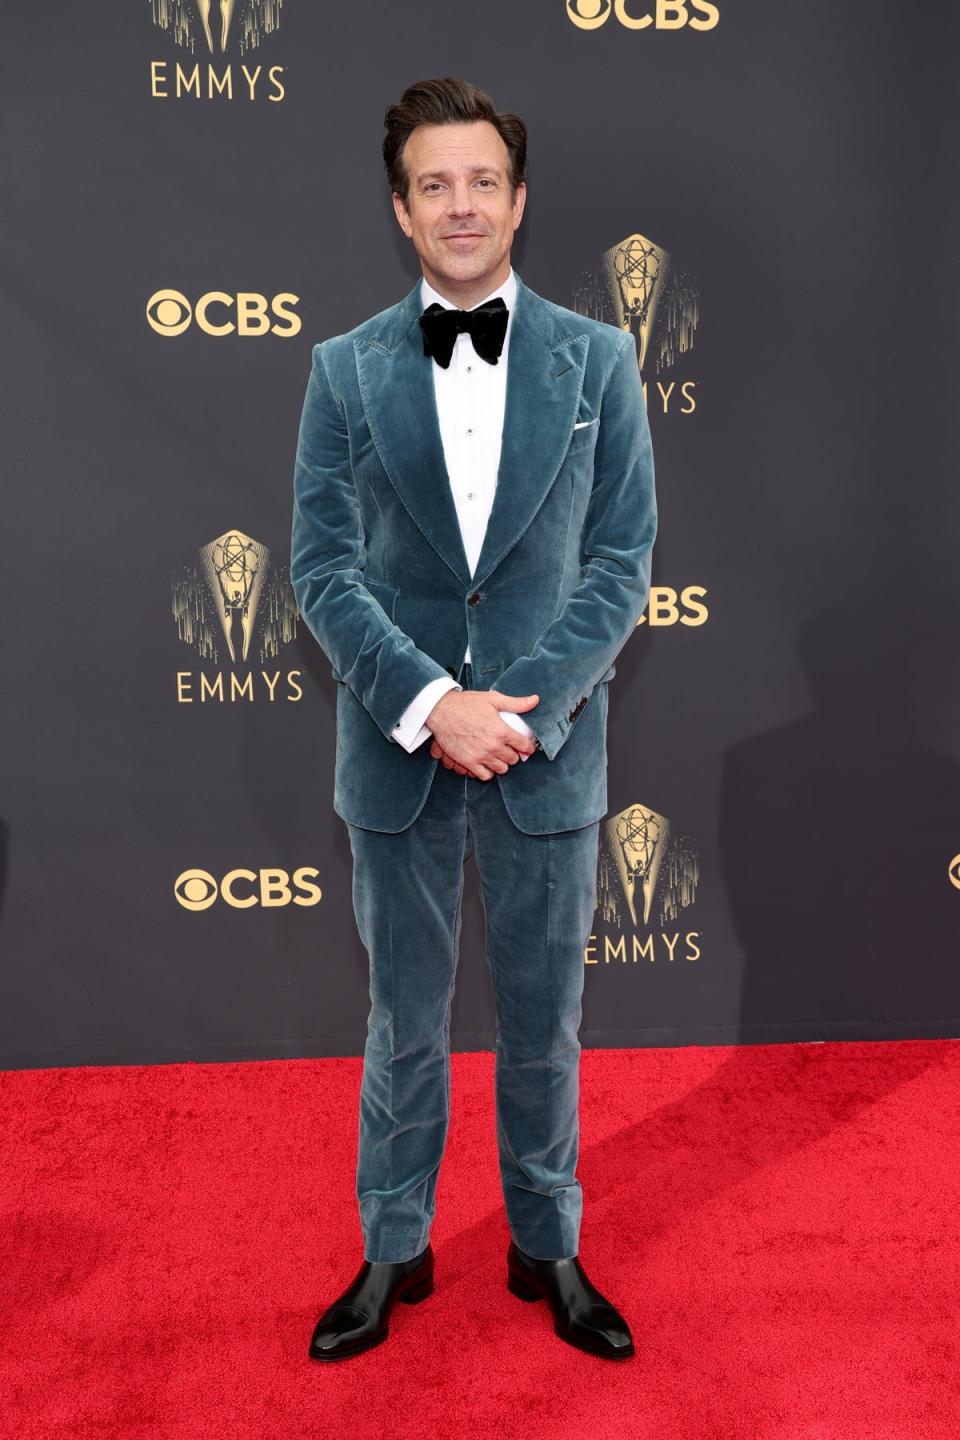 Jason Sudeikis at the Emmy Awards 2021 (Getty Images)